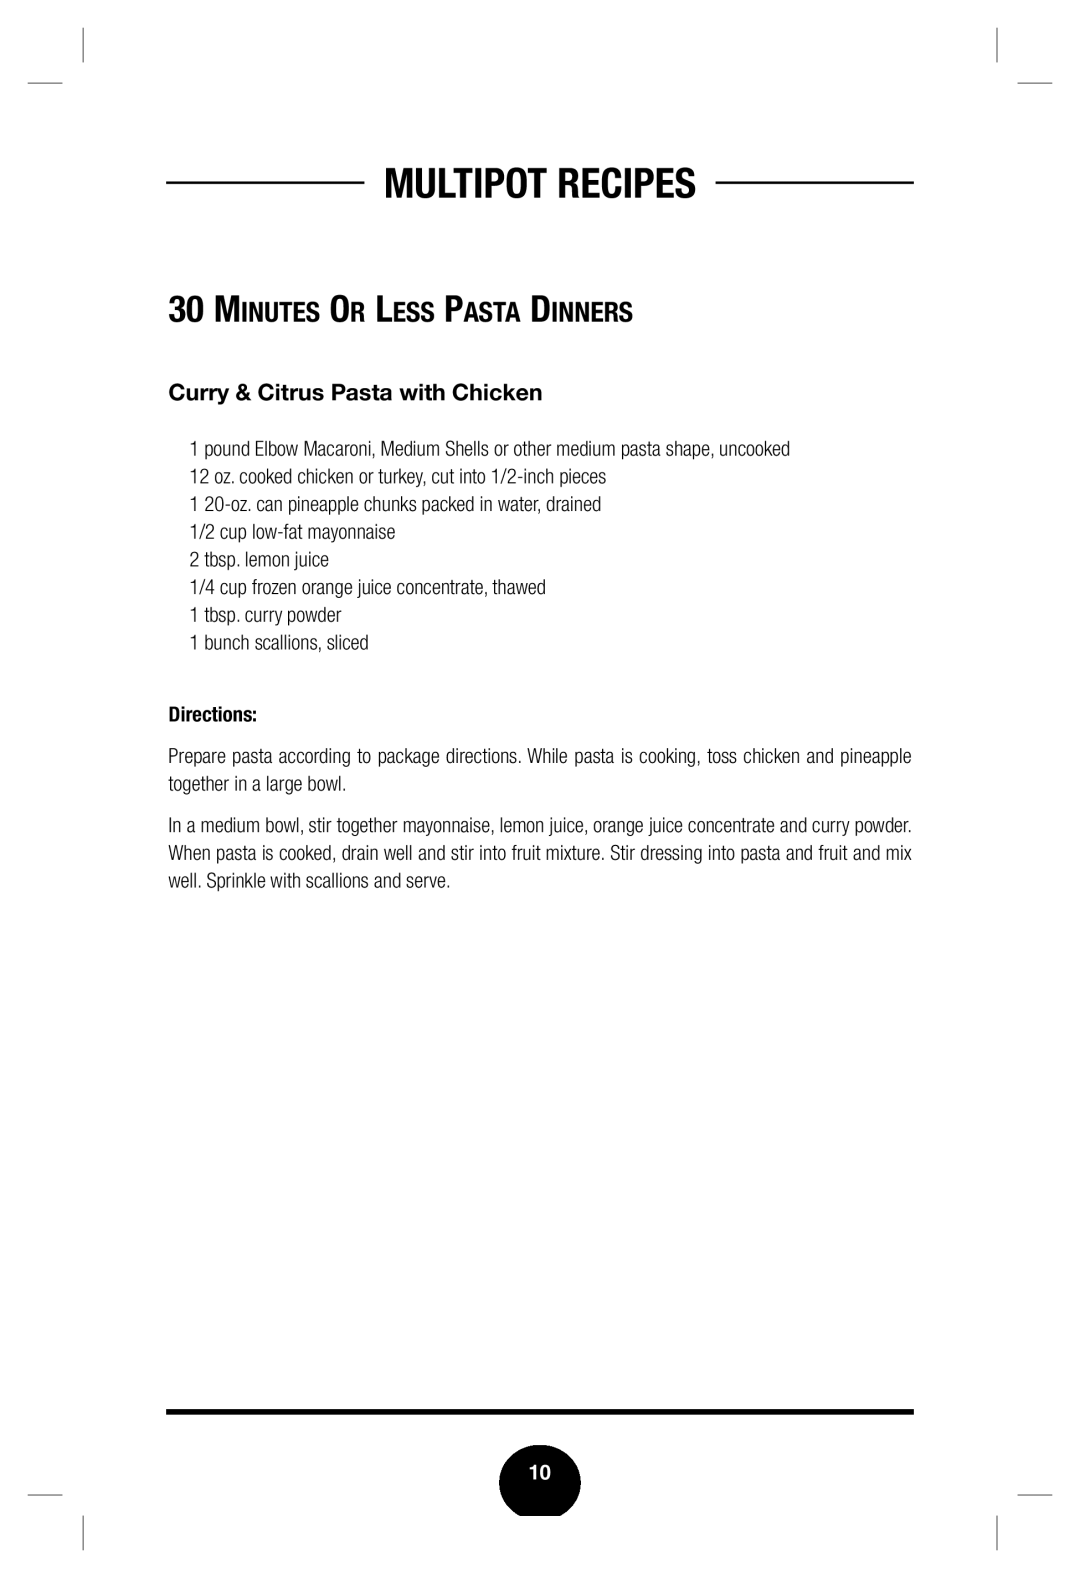 Fagor America none manual Minutes Or Less Pasta Dinners, Curry & Citrus Pasta with Chicken, Multipot Recipes 